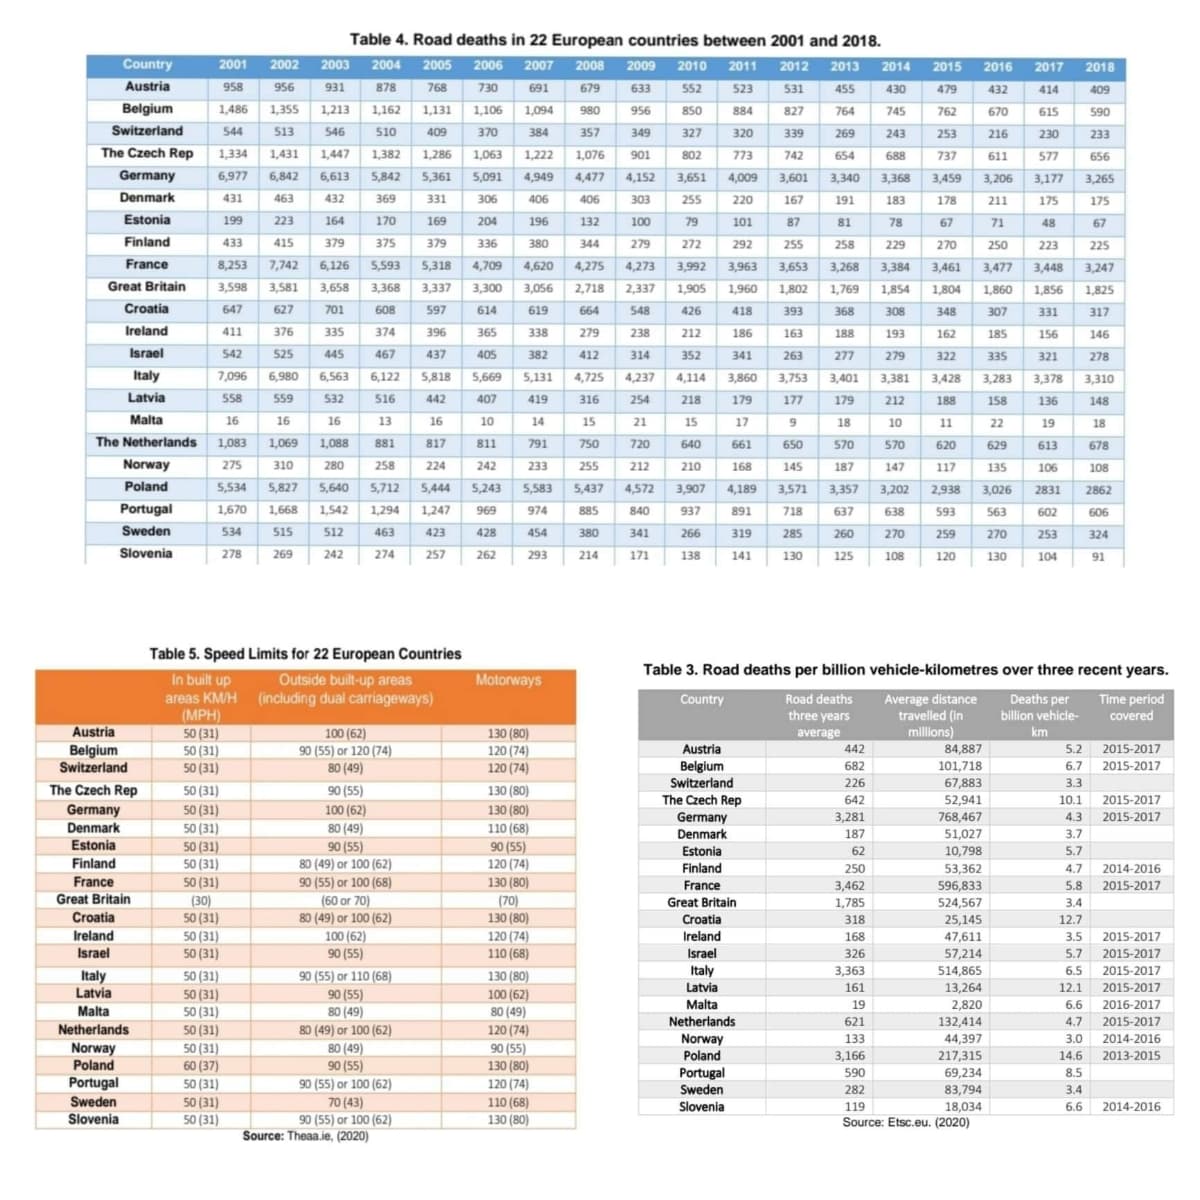 Table 4. Road deaths in 22 European countries between 2001 and 2018.
2003 2004
Country
2001
2002
2005 2006 2007 2008 2009
2010 2011
2012 2013 2014
2015 2016 2017 2018
Austria
958
956
931
878
768
730
691
679
633
552
523
531
455
430
479
432
414
409
Belgium
1,486
1,355
1,213 1,162 1,131 1,106
745
615
1,094
980
956
850
884
827
764
762
670
590
Switzerland
544
513
546
510
409
370
384
357
349
327
320
339
269
243
253
216
230
233
The Czech Rep
1,334
1,431
1,447
1,382
1,286
1,063
1,222
1,076
901
802
773
742
654
688
737
611
577
656
Germany
6,977
6,842
6,613
5,842
5,361
5,091
4,949
4,477 4,152
3,651
4,009
3,601
3,340
3,368
3,459
3,206
3,177
3,265
Denmark
431
463
432
369
331
306
406
406
303
255
220
167
191
183
178
211
175
175
Estonia
199
223
164
170
169
204
196
132
100
79
101
87
81
78
67
71
48
67
Finland
433
415
379
375
379
336
380
344
279
272
292
255
258
229
270
250
223
225
France
8,253
7,742
6,126
5,593
5,318
4,709
4,620
4,275
4,273
3,992
3,963
3,653
3,268
3,384
3,461 3,477
3,448
3,247
Great Britain
3,598
3,581
3,658
3,368
3,337
3,300
3,056
2,718
2,337
1,905
1,960
1,802
1,769
1,854
1,804
1,860
1,856
1,825
Croatia
647
627
701
608
597
614
619
664
548
426
418
393
368
308
348
307
331
317
Ireland
411
376
335
374
396
365
338
279
238
212
186
163
188
193
162
185
156
146
Israel
542
525
445
467
437
405
382
412
314
352
341
263
277
279
322
335
321
278
Italy
7,096
6,980
6,563
6,122
5,818 5,669 5,131
4,725
4,237
4,114
3,860
3,753
3,401
3,381
3,428 3,283
3,378
3,310
Latvia
558
559
532
516
442
407
419
316
254
218
179
177
179
212
188
158
136
148
Malta
16
16
16
13
16
10
14
15
21
15
17
18
10
11
22
19
18
The Netherlands 1,083
1,069
1,088
881
817
811
791
750
720
640
661
650
570
570
620
629
613
678
Norway
275
310
280
258
224
242
233
255
212
210
168
145
187
147
117
135
106
108
Poland
5,534 5,827
5,640
5,712
5,444
5,243 5,583
5,437
4,572
3,907
4,189
3,571
3,357
3,202
2,938
3,026
2831
2862
Portugal
1,670
1,668
1,542
1,294
1,247
969
974
885
840
937
891
718
637
638
593
563
602
606
Sweden
534
515
512
463
423
428
454
380
341
266
319
285
260
270
259
270
253
324
Slovenia
278
269
242
274
257
262
293
214
171
138
141
120
130
130
125
108
104
91
Table 5. Speed Limits for 22 European Countries
Table 3. Road deaths per billion vehicle-kilometres over three recent years.
Outside built-up areas
In built up
areas KM/H (including dual carriageways)
(MPH)
50 (31)
Motorways
Road deaths
three years
Deaths per Time period
Country
Average distance
travelled (in
millions)
billion vehicle-
covered
Austria
100 (62)
130 (80)
average
km
Austria
Belgium
Switzerland
5.2 2015-2017
6.7
442
84,887
Belgium
Switzerland
90 (55) or 120 (74)
80 (49)
50 (31)
120 (74)
50 (31)
120 (74)
682
101,718
2015-2017
67,883
52,941
226
3.3
The Czech Rep
50 (31)
90 (55)
130 (80)
The Czech Rep
642
10.1
2015-2017
Germany
50 (31)
50 (31)
100 (62)
130 (80)
110 (68)
Germany
3,281
768,467
4.3
2015-2017
Denmark
80 (49)
Denmark
187
51,027
3.7
Estonia
90 (55)
50 (31)
50 (31)
90 (55)
80 (49) or 100 (62)
90 (55) or 100 (68)
(60 or 70)
80 (49) or 100 (62)
Estonia
62
10,798
5.7
Finland
120 (74)
Finland
250
53,362
4.7
2014-2016
France
50 (31)
(30)
130 (80)
France
3,462
1,785
596,833
5.8
2015-2017
Great Britain
(70)
130 (80)
120 (74)
110 (68)
Great Britain
524,567
3.4
Croatia
50 (31)
Croatia
318
25,145
12.7
Ireland
Israel
50 (31)
50 (31)
100 (62)
90 (55)
Ireland
168
47,611
3.5
2015-2017
Israel
Italy
326
57,214
5.7
2015-2017
Italy
Latvia
50 (31)
3,363
514,865
6.5
2015-2017
90 (55) or 110 (68)
130 (80)
Latvia
161
13,264
12.1
2015-2017
50 (31)
50 (31)
50 (31)
50 (31)
60 (37)
90 (55)
100 (62)
80 (49)
Malta
Netherlands
Malta
80 (49)
19
2,820
6.6
2016-2017
621
132,414
4.7
2015-2017
Netherlands
80 (49) or 100 (62)
120 (74)
3.0
Norway
Poland
Portugal
Sweden
Slovenia
133
44,397
217,315
2014-2016
Norway
Poland
80 (49)
90 (55)
90 (55)
130 (80)
3,166
14.6
2013-2015
69,234
83,794
18,034
Source: Etsc.eu. (2020)
590
8.5
Portugal
50 (31)
90 (55) or 100 (62)
70 (43)
90 (55) or 100 (62)
Source: Theaa.ie, (2020)
120 (74)
282
3.4
110 (68)
130 (80)
Sweden
50 (31)
119
6.6
2014-2016
Slovenia
50 (31)
